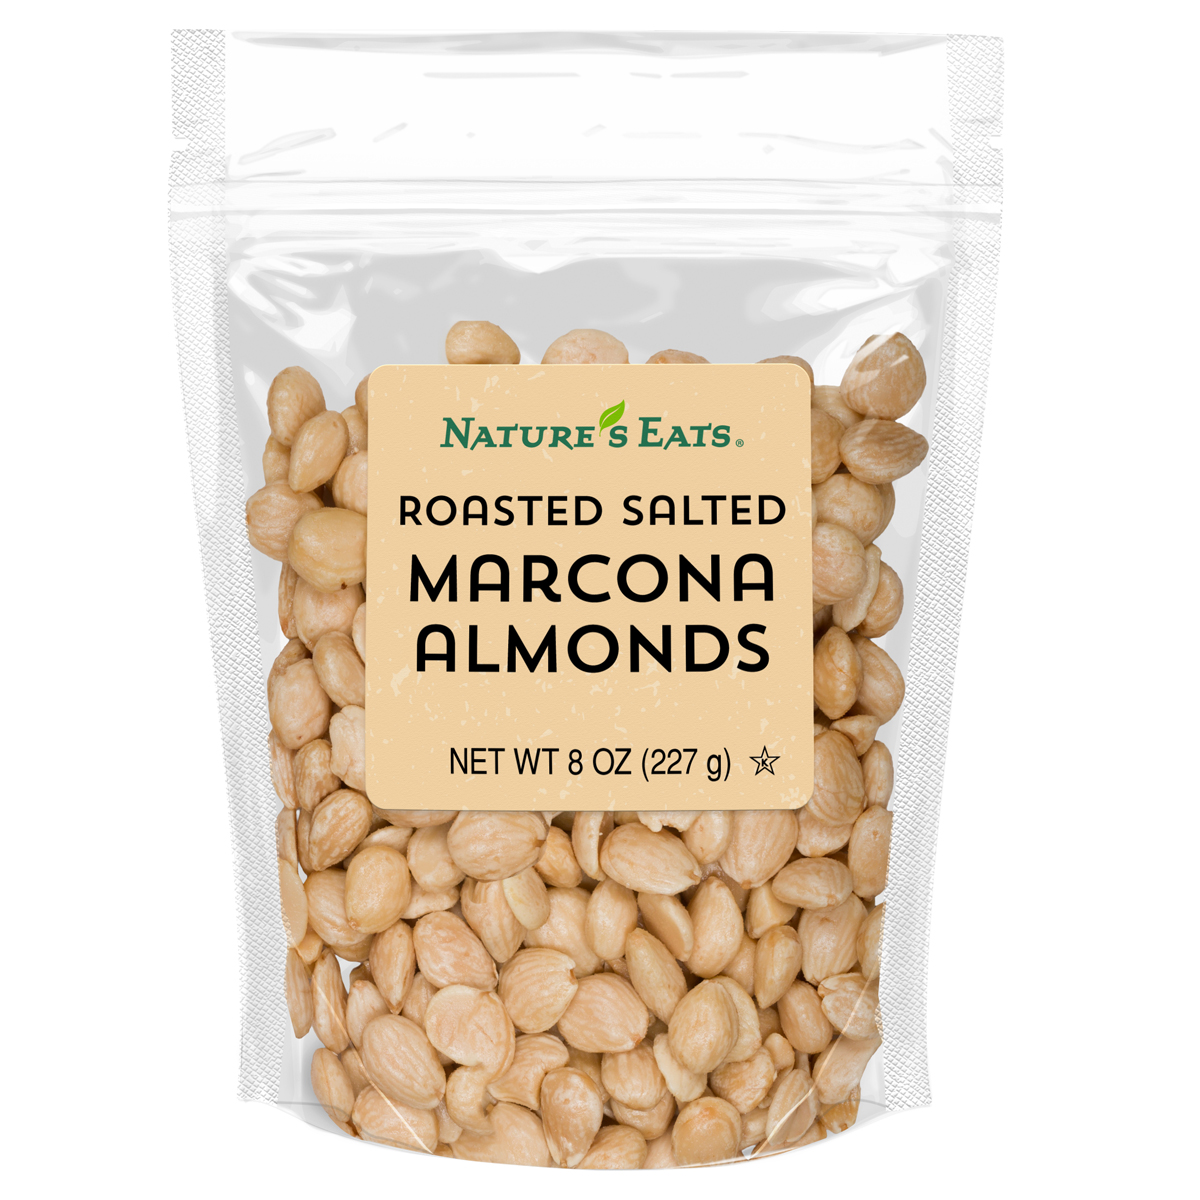 Roasted Salted Marcona Almonds